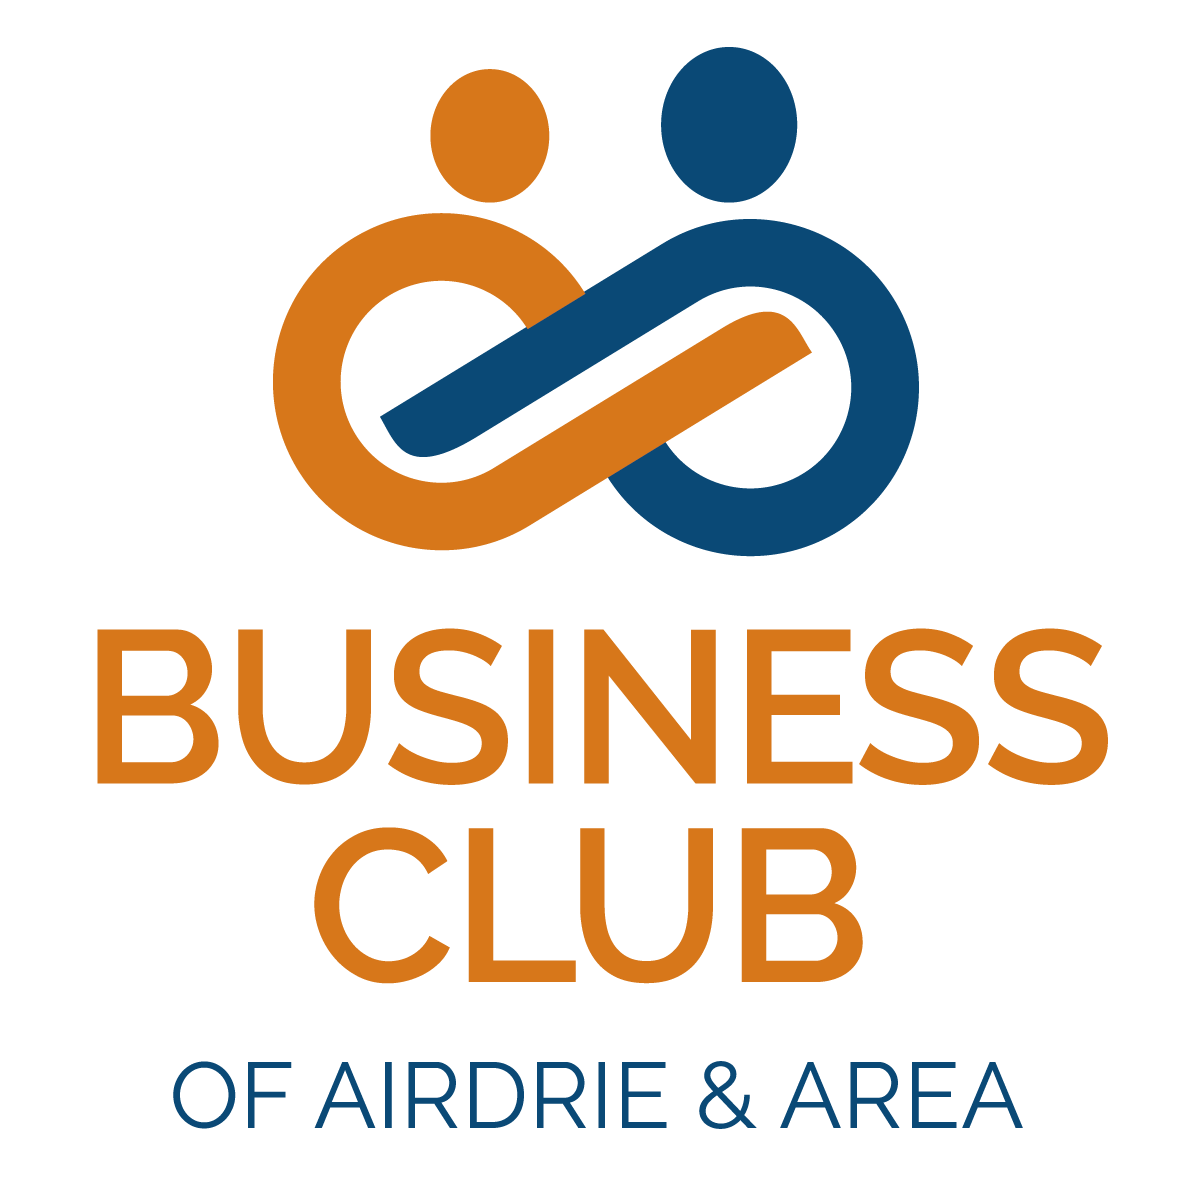 The Airdrie Business Club